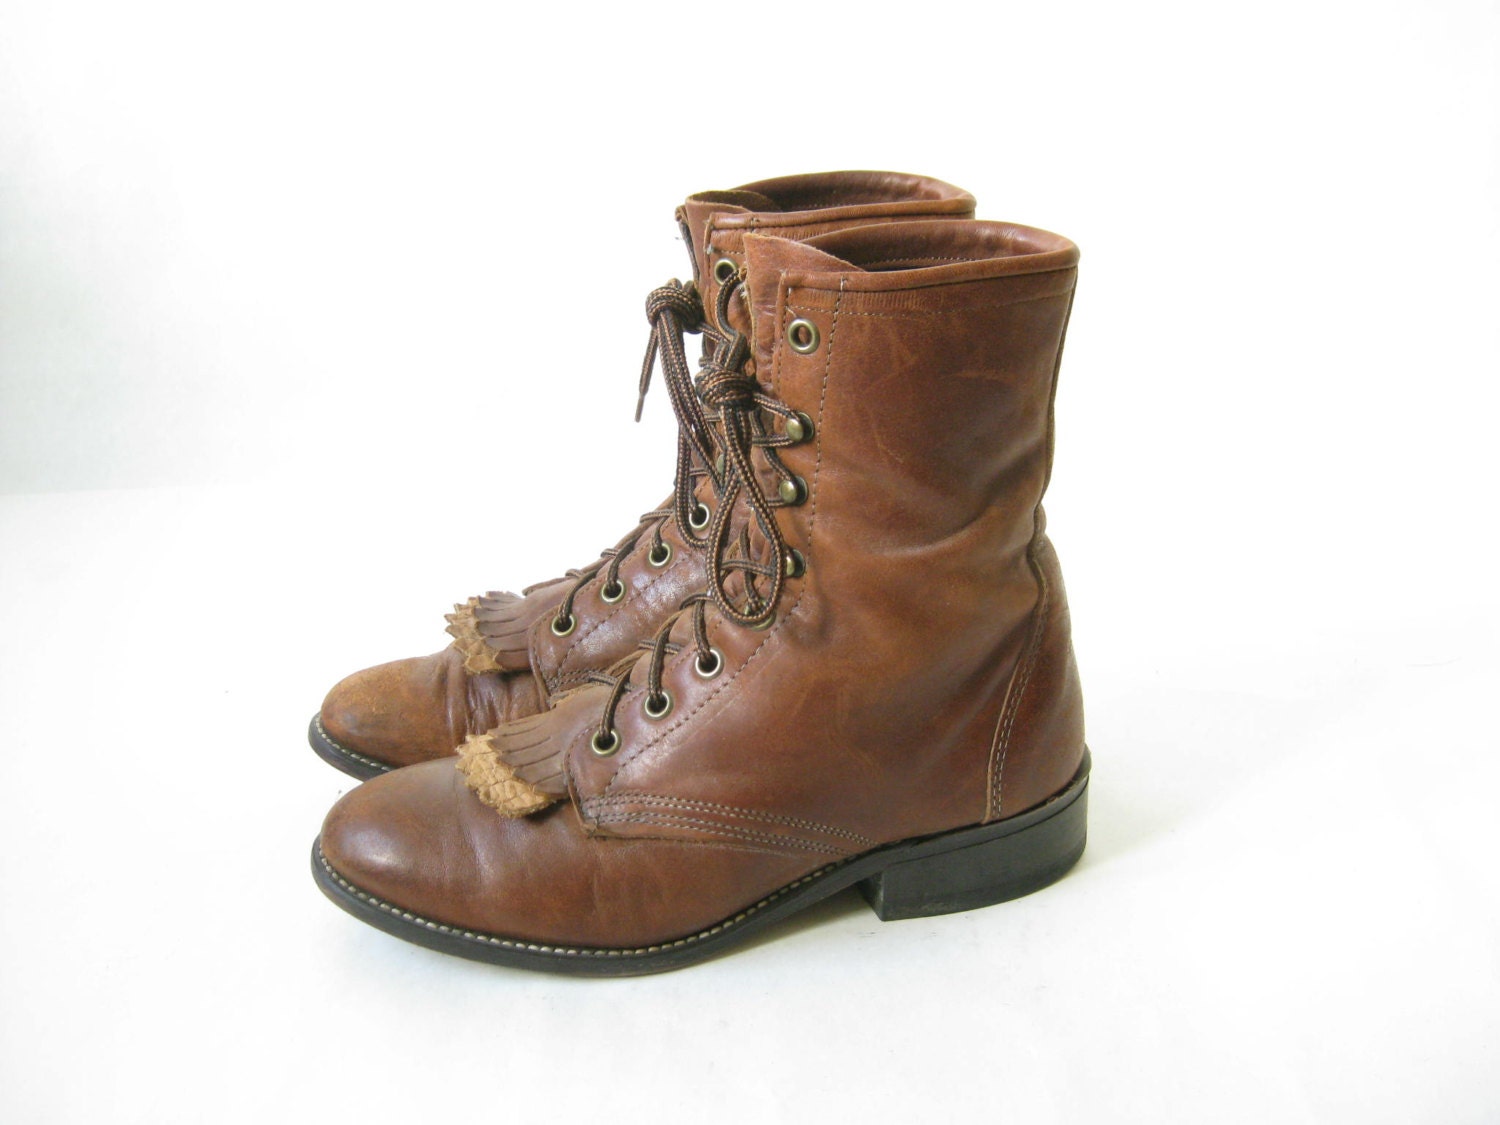 Vintage Roper Boots. Brown Leather Lace Up Roper Boots. Size 6